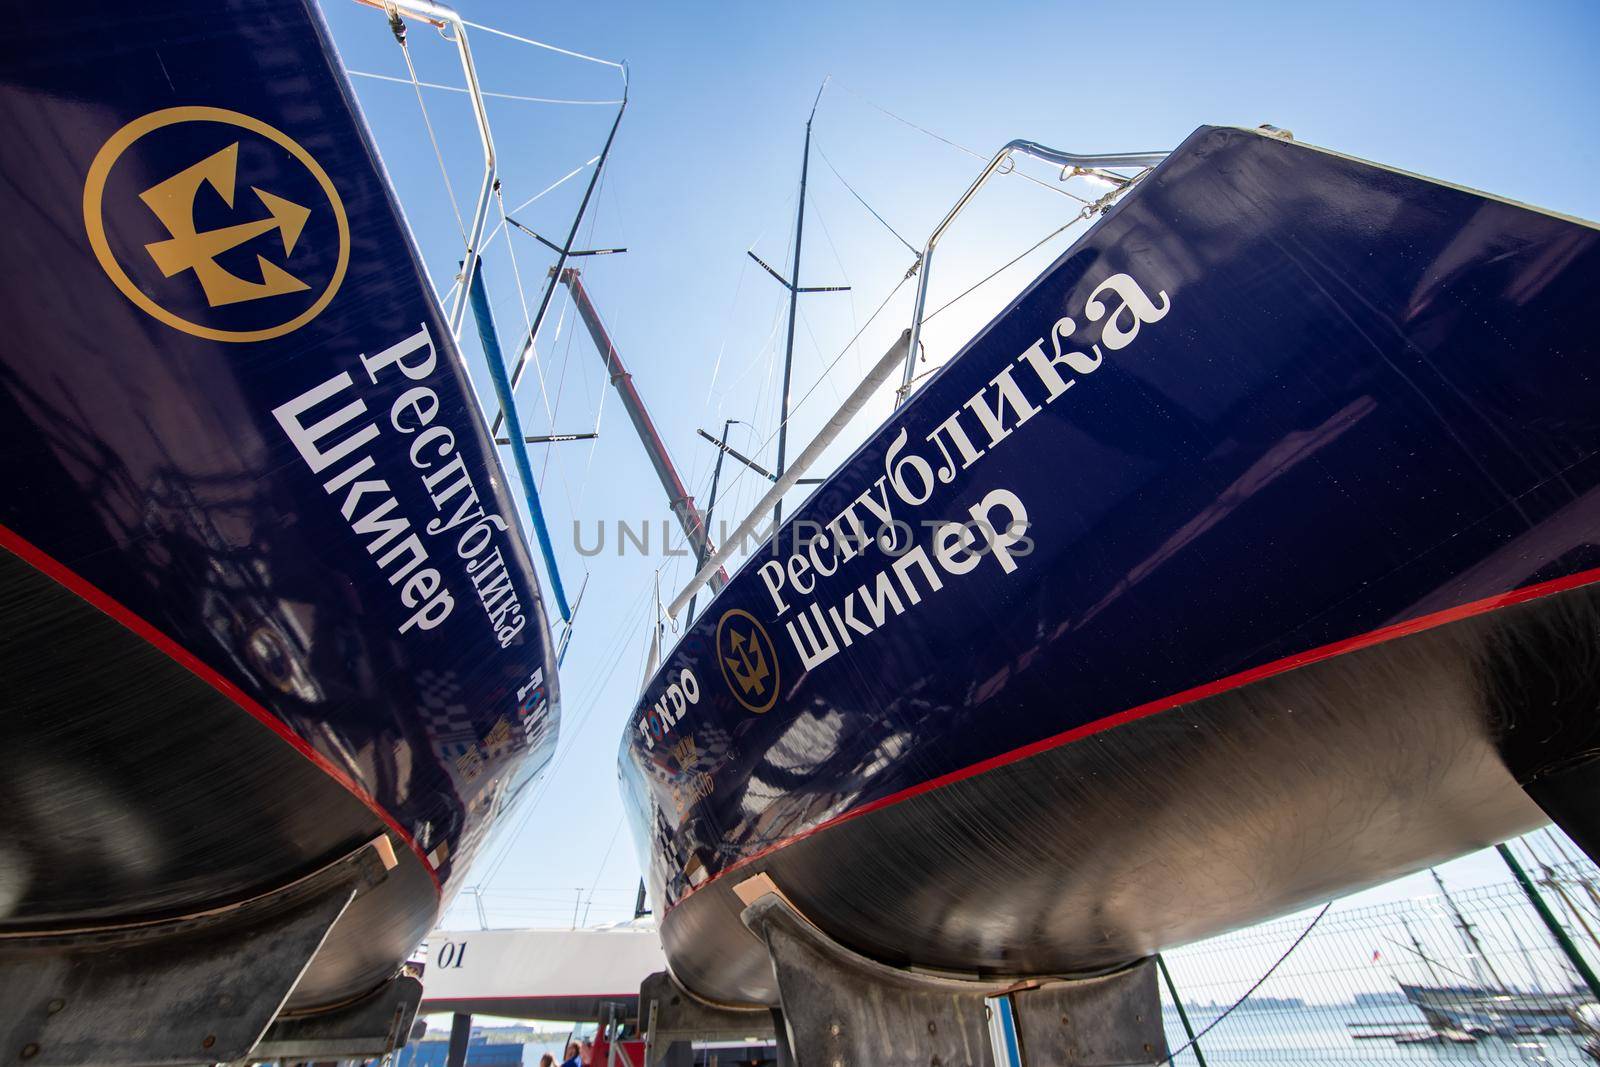 Russia, St.Petersburg, 26 May 2020: Port Hercules, the sailboats stand on supports, the bottom view, masts and the slings, a clear sunny weather, the blue sky, the bottom of the boat and kiel, logo